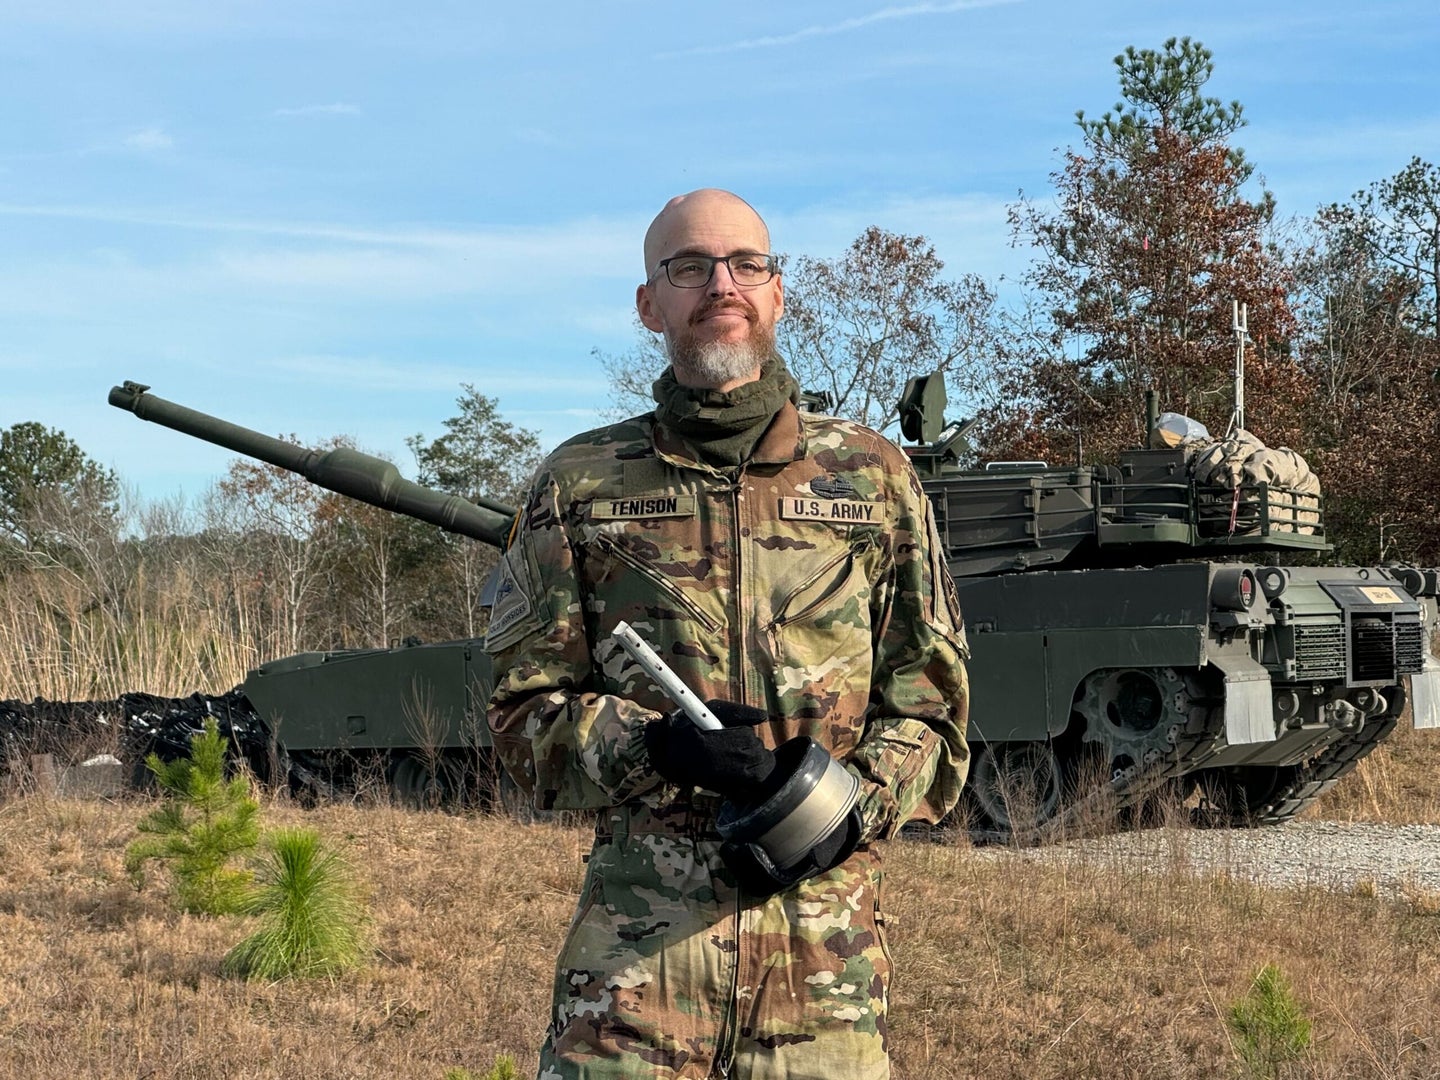 Jay Tenison in front of tank